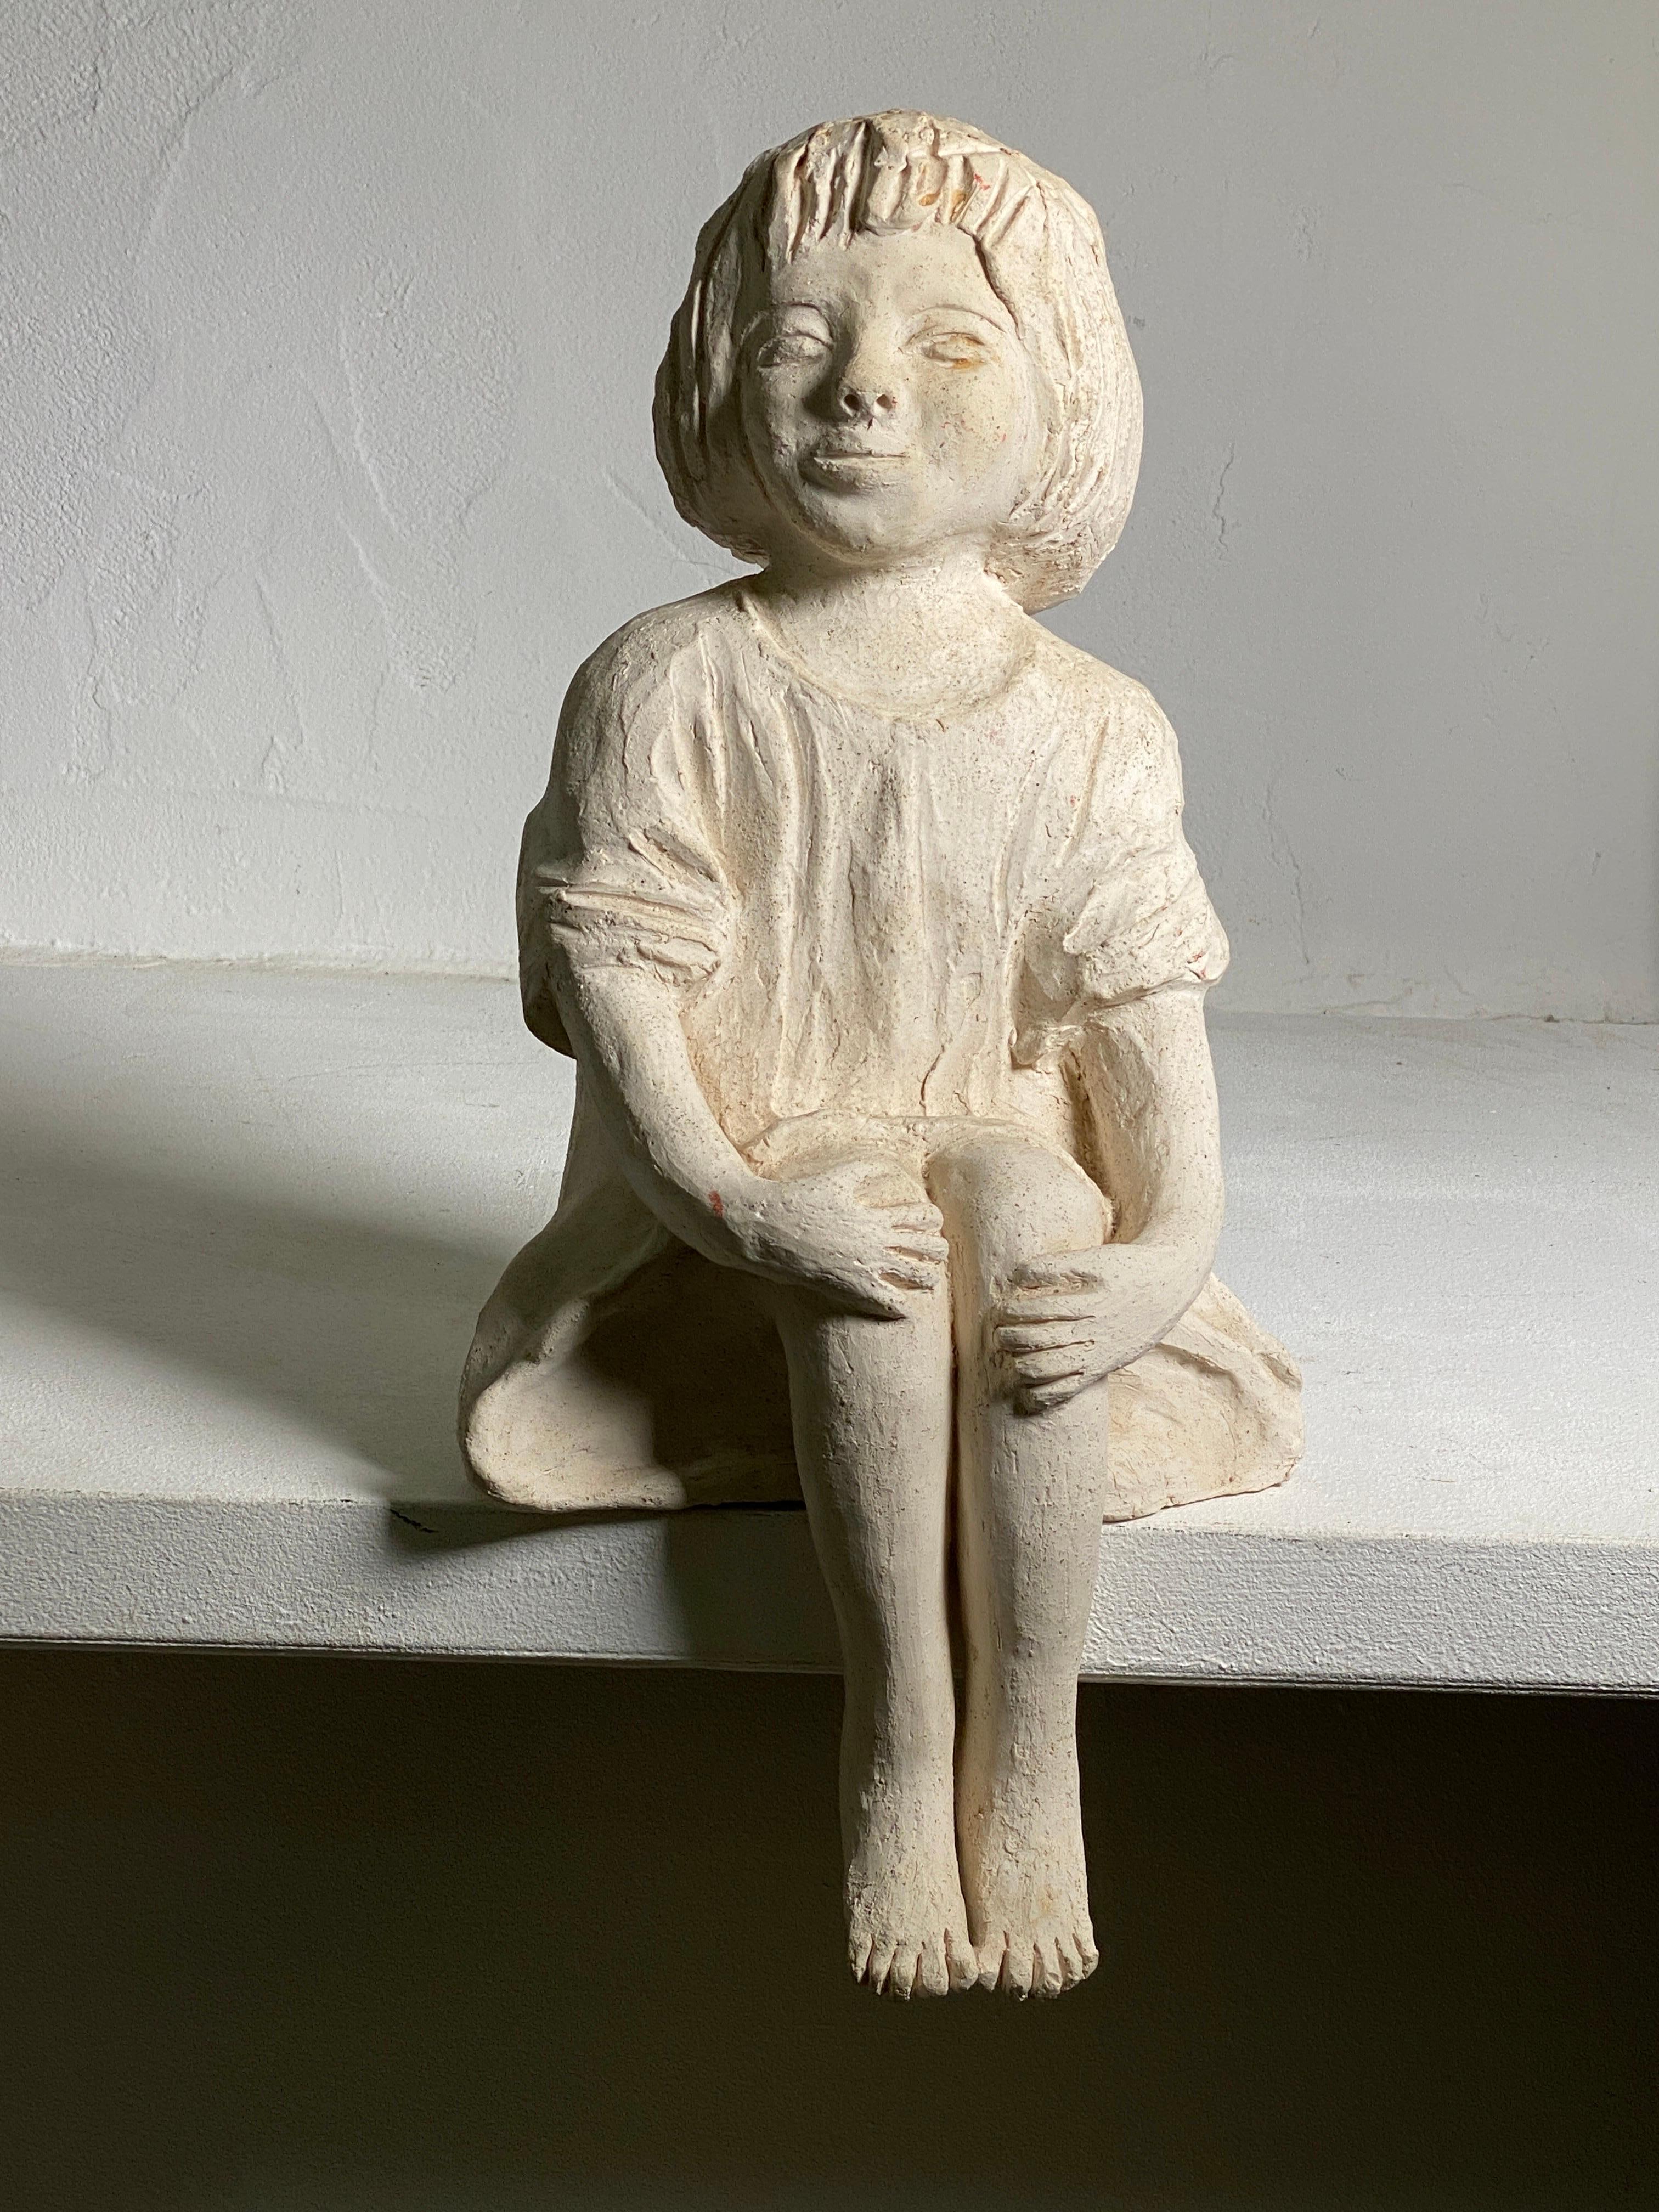 Mid-20th Century Plaster Sculpture Art Deco Period Sitting Woman France, circa 1930 For Sale